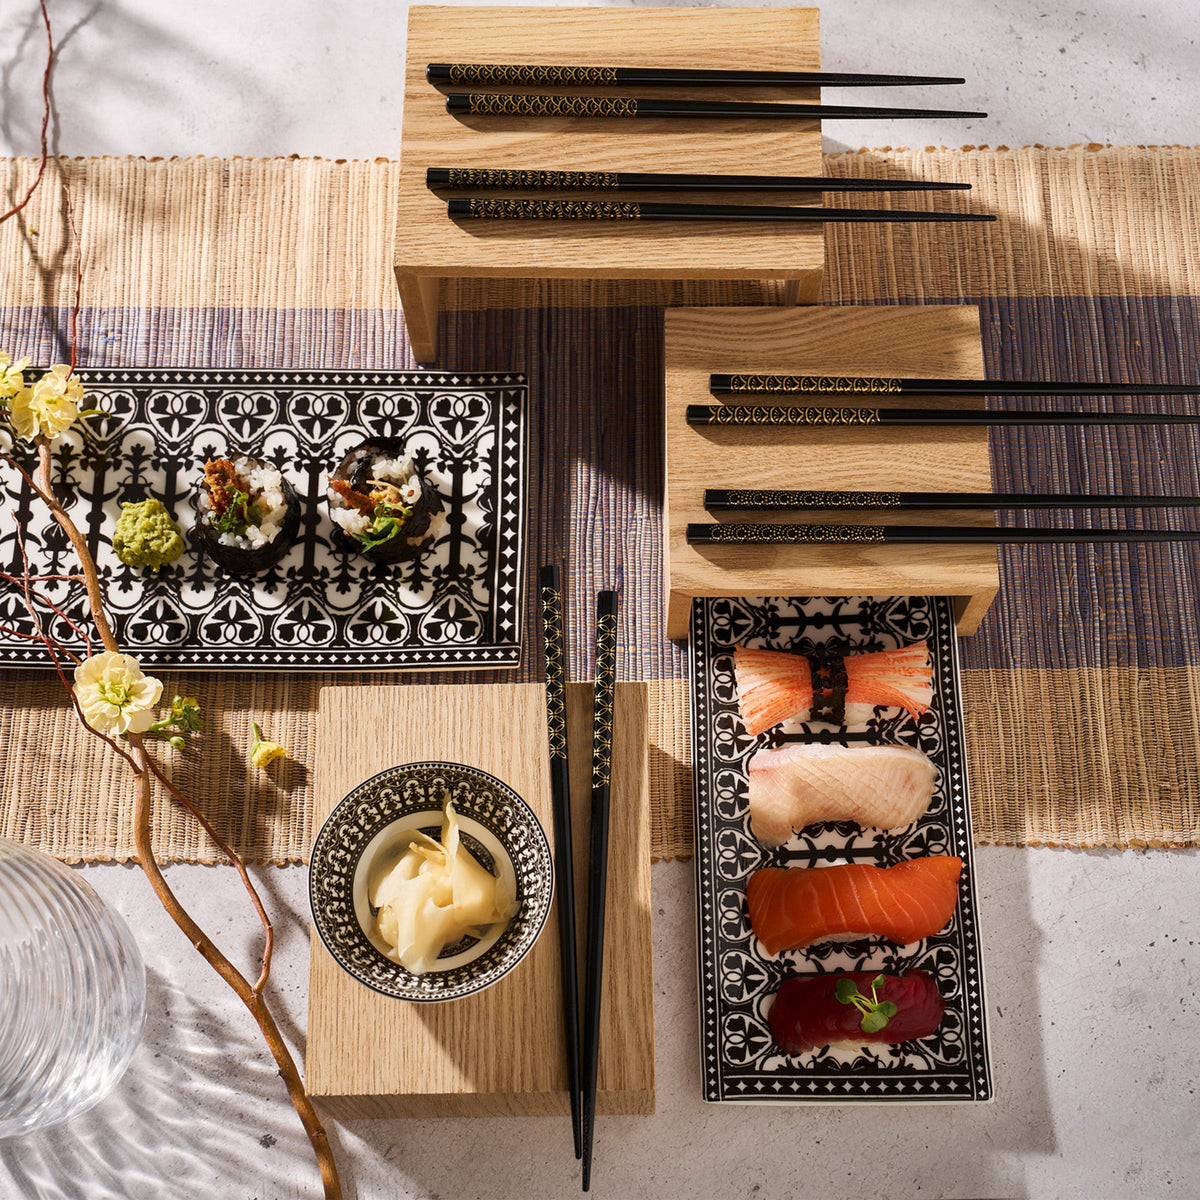 Japanese sushi and black lacquered wood Osaka Chopsticks with gold patterns on a table.